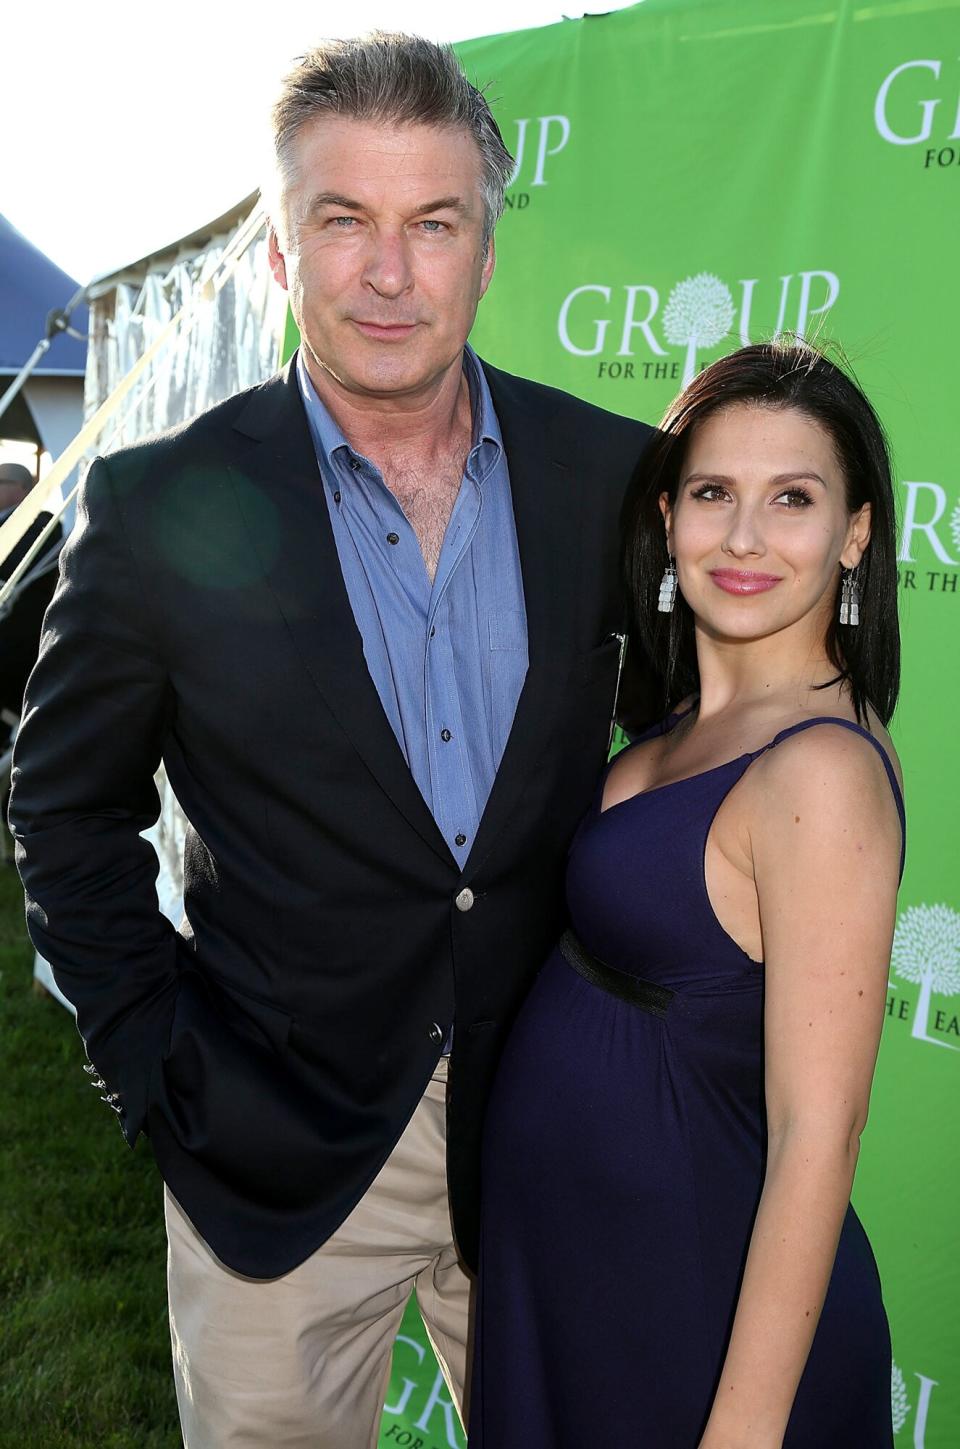 Alec Baldwin and Hilaria Baldwin attend the "Dive Into Summer" Benefit at Wolffer Estate Vineyard on June 15, 2013 in Sagaponack, New York